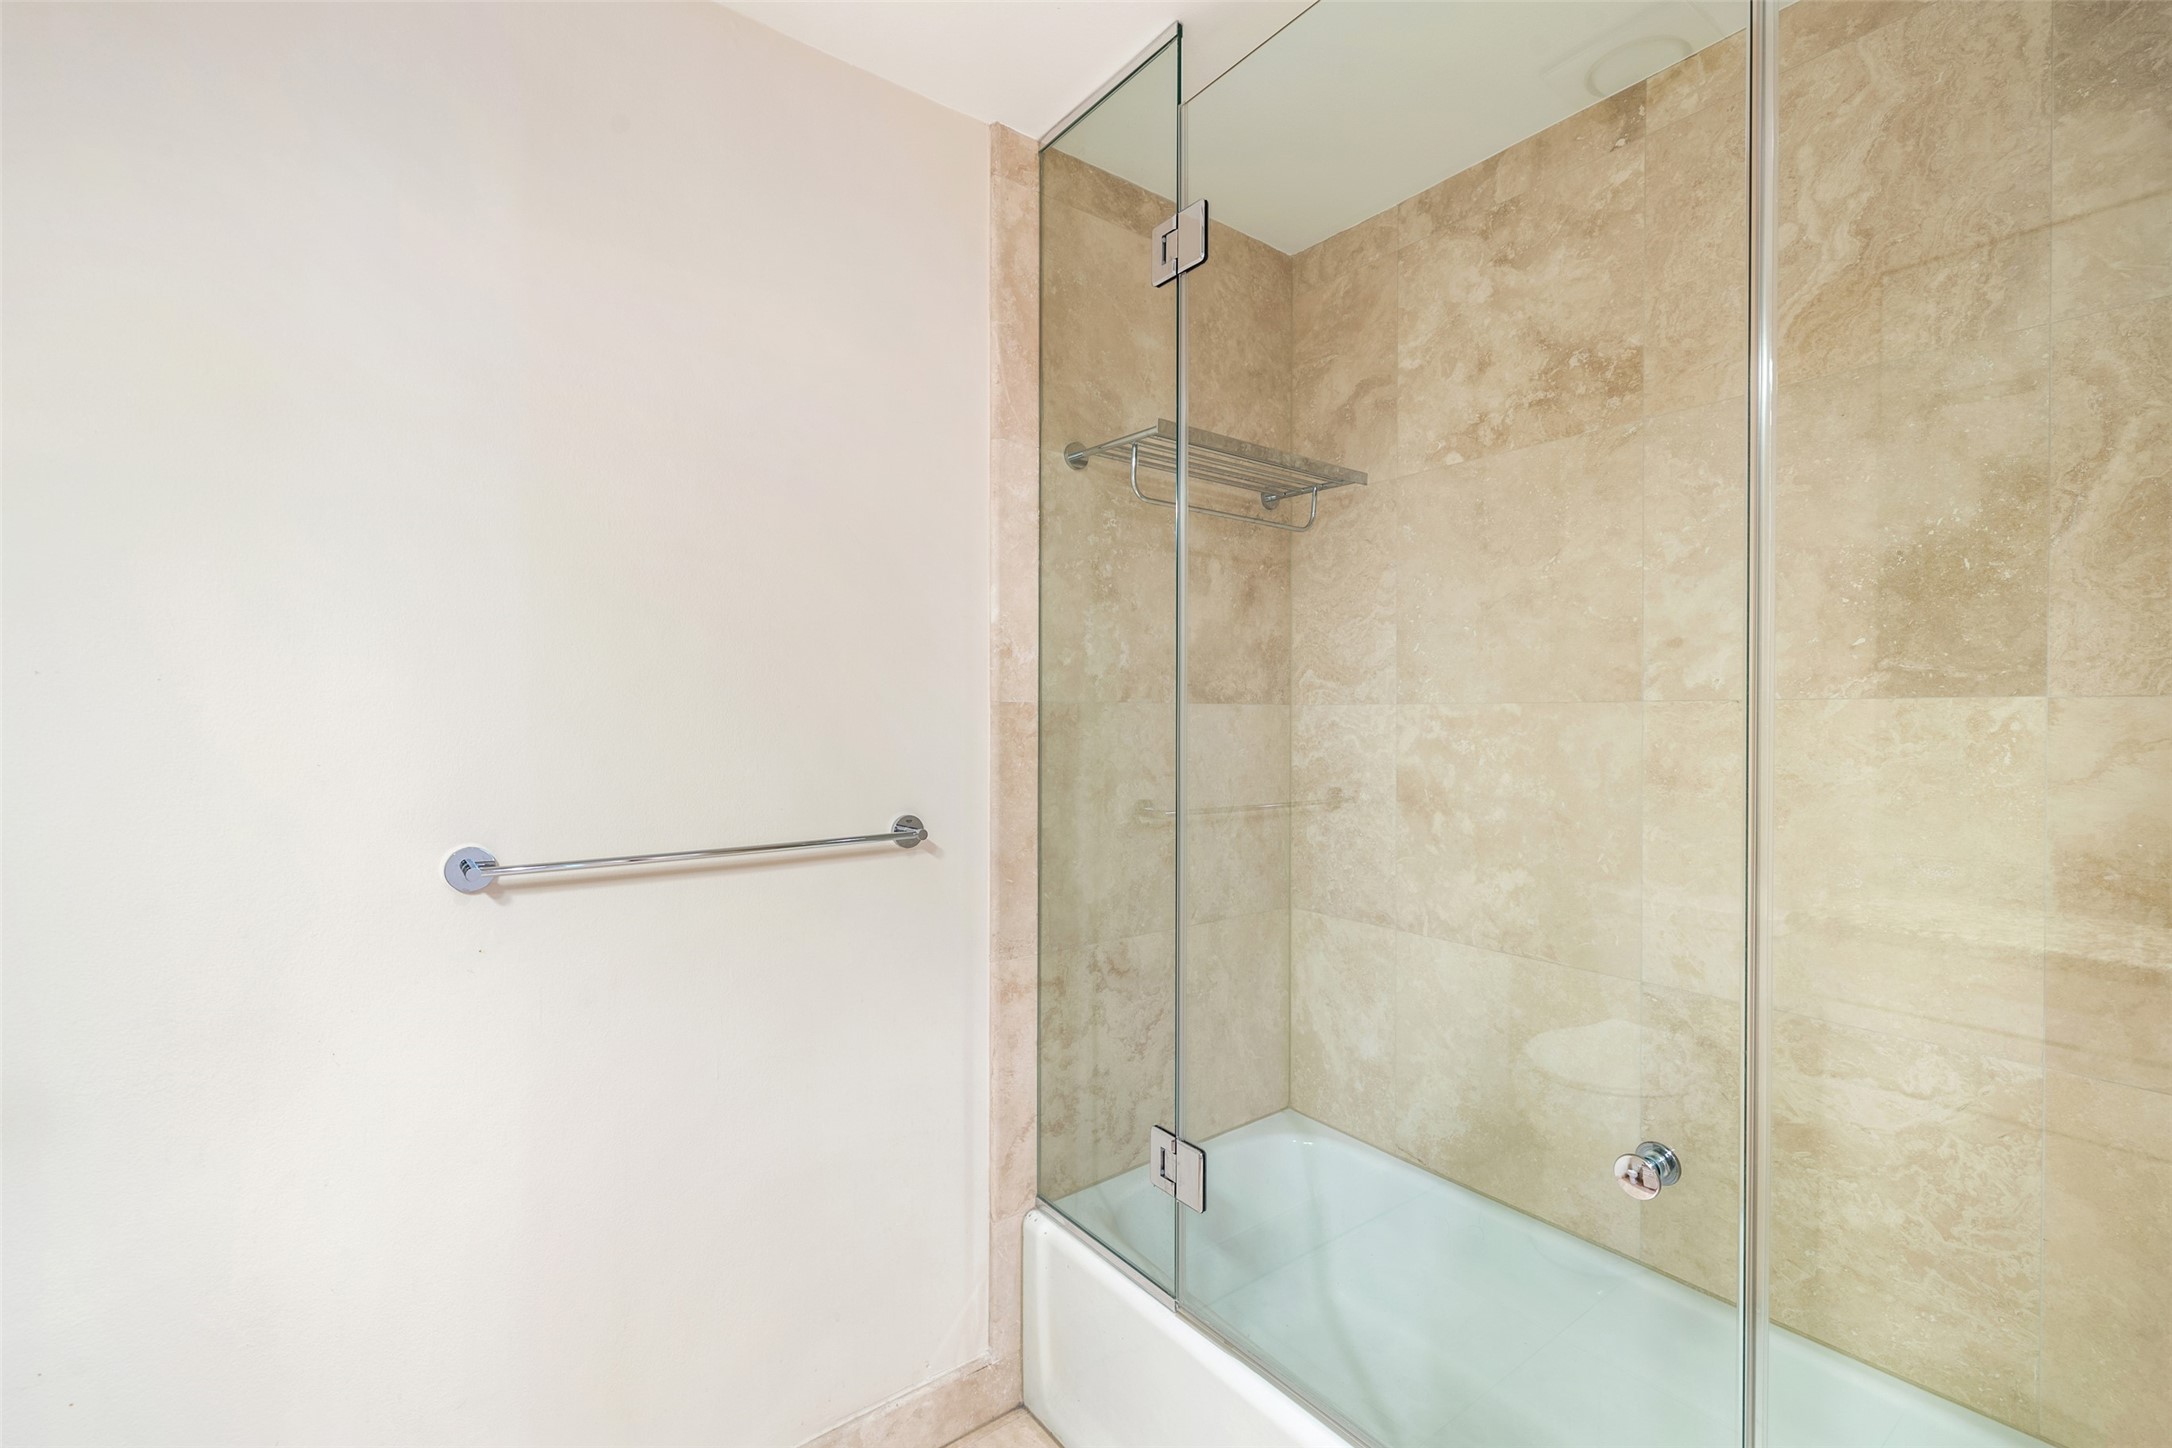 Secondary bathroom is also equipped with a shower and tub with frameless glass door.